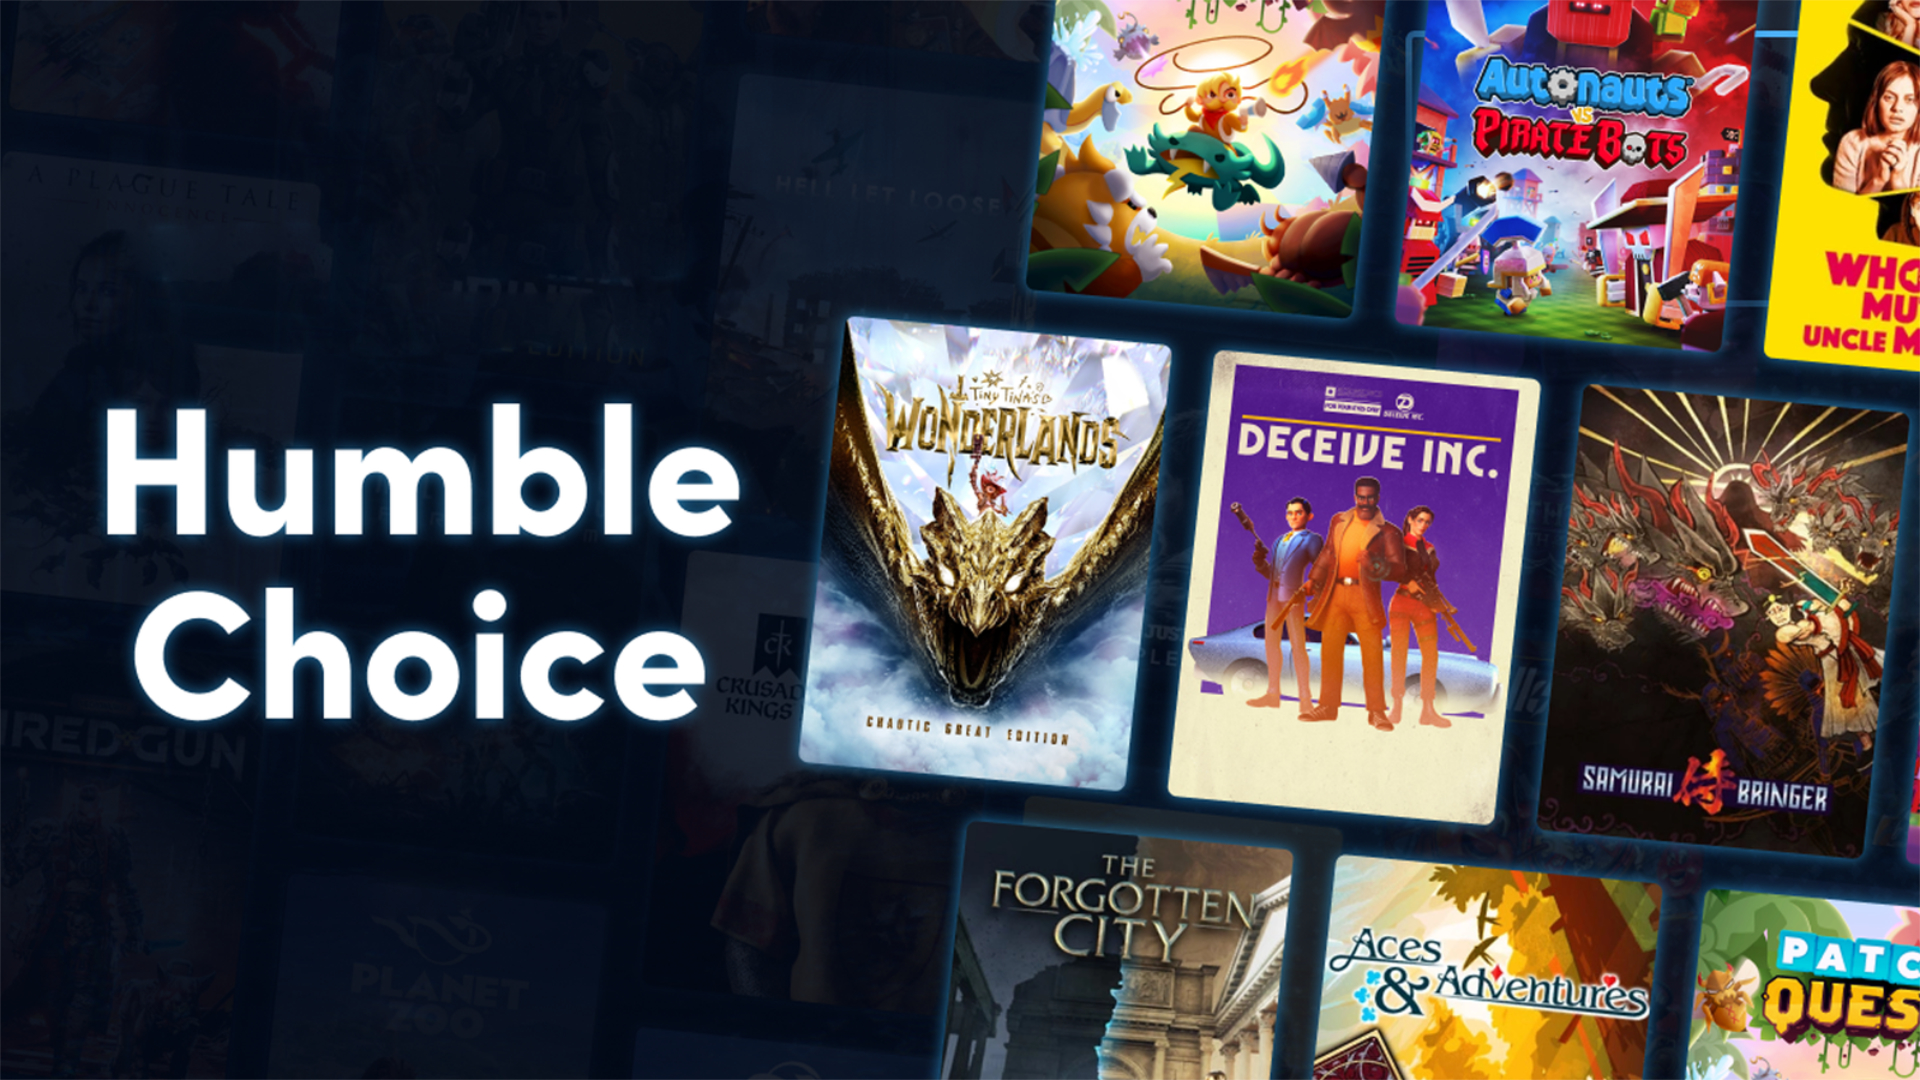 February's Humble Choice is up with a new bunch of good looking games